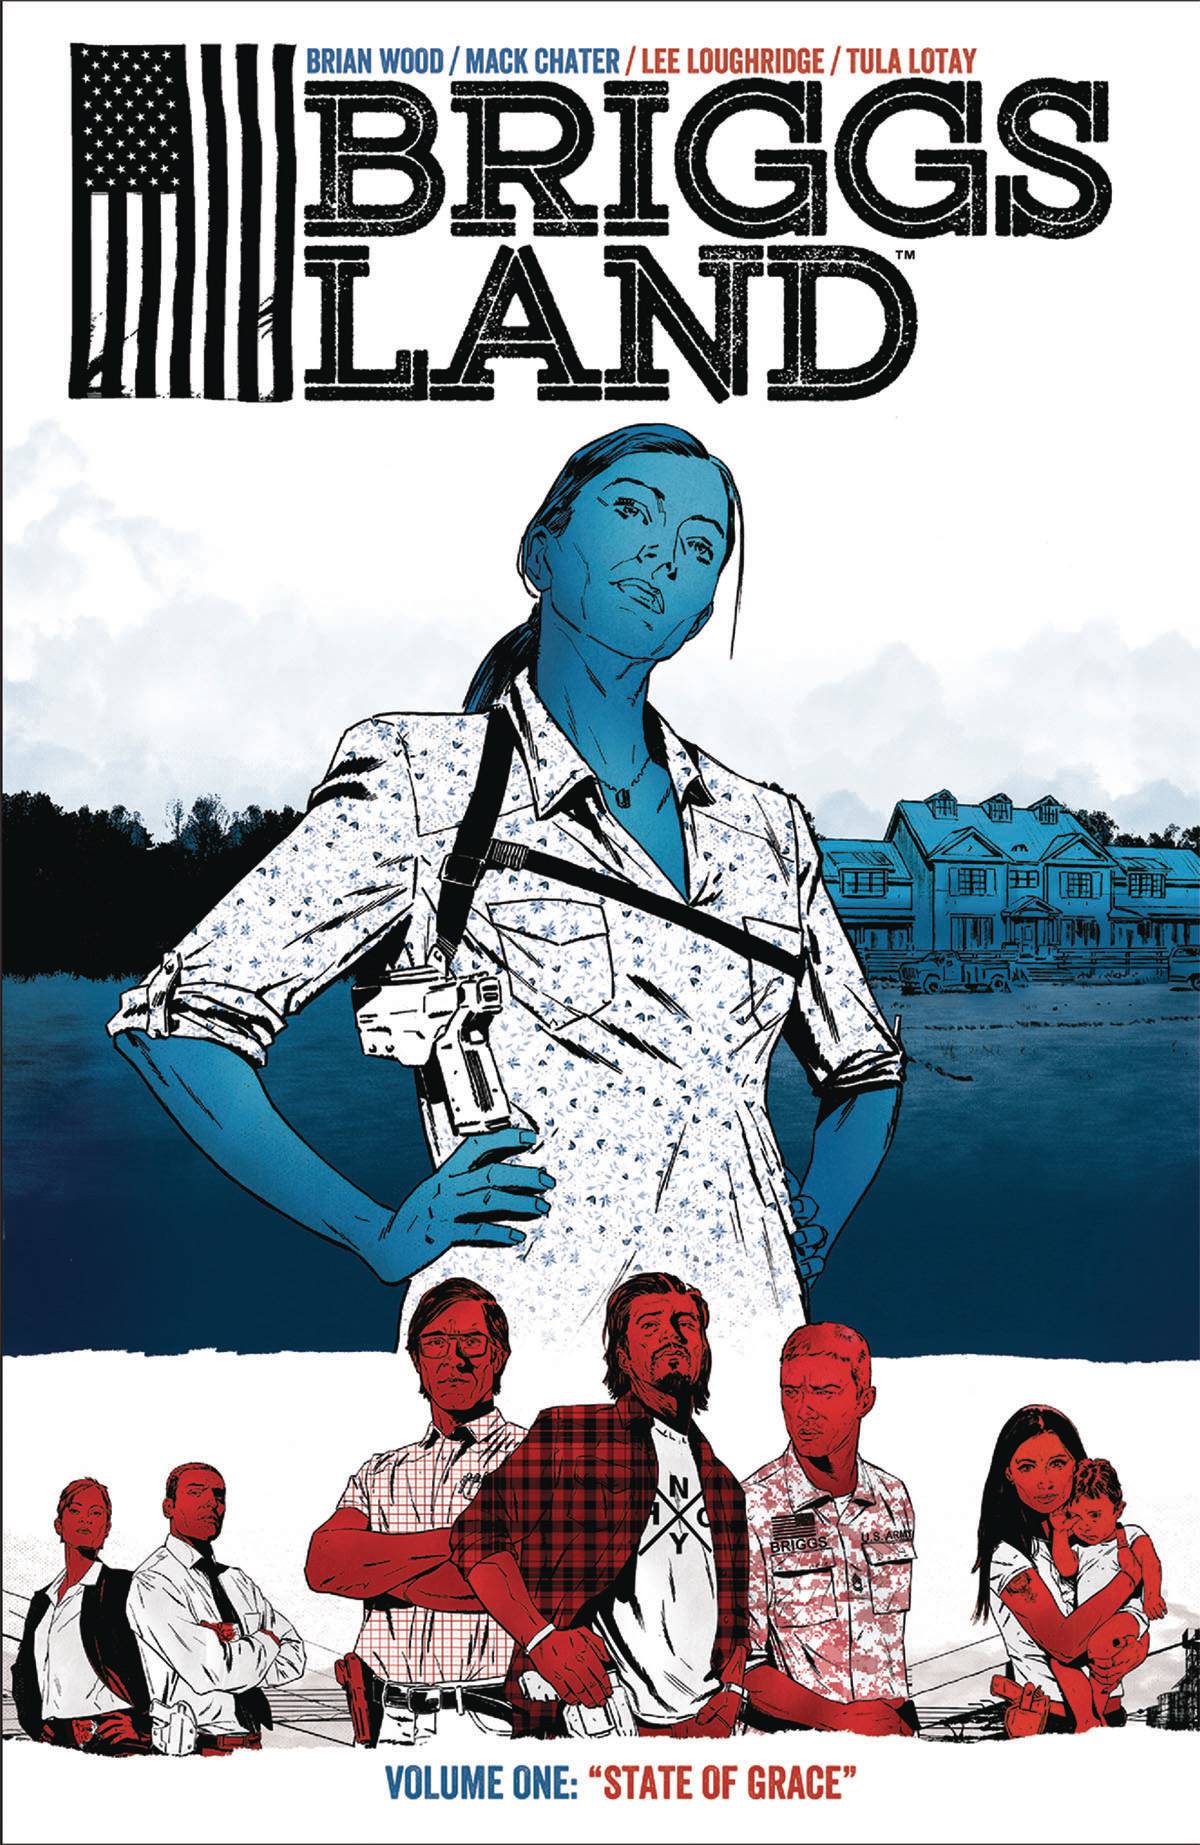 Briggs Land Vol 01: State of Grace TPB